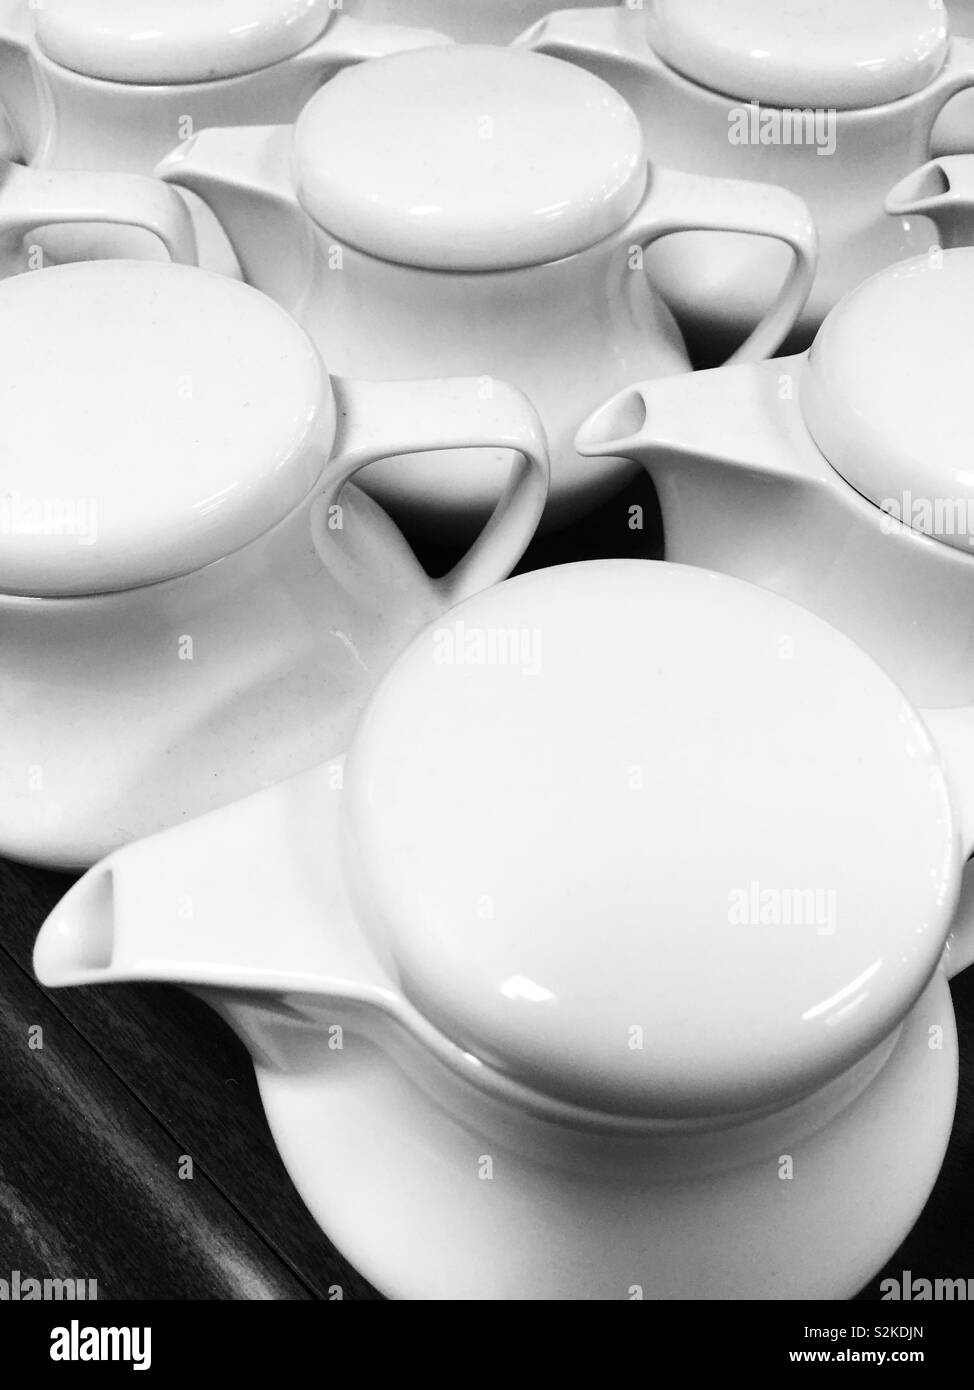 Closeup of group of white teapots on black table. Still life cafe, restaurant background of white ceramic teapots. Stock Photo